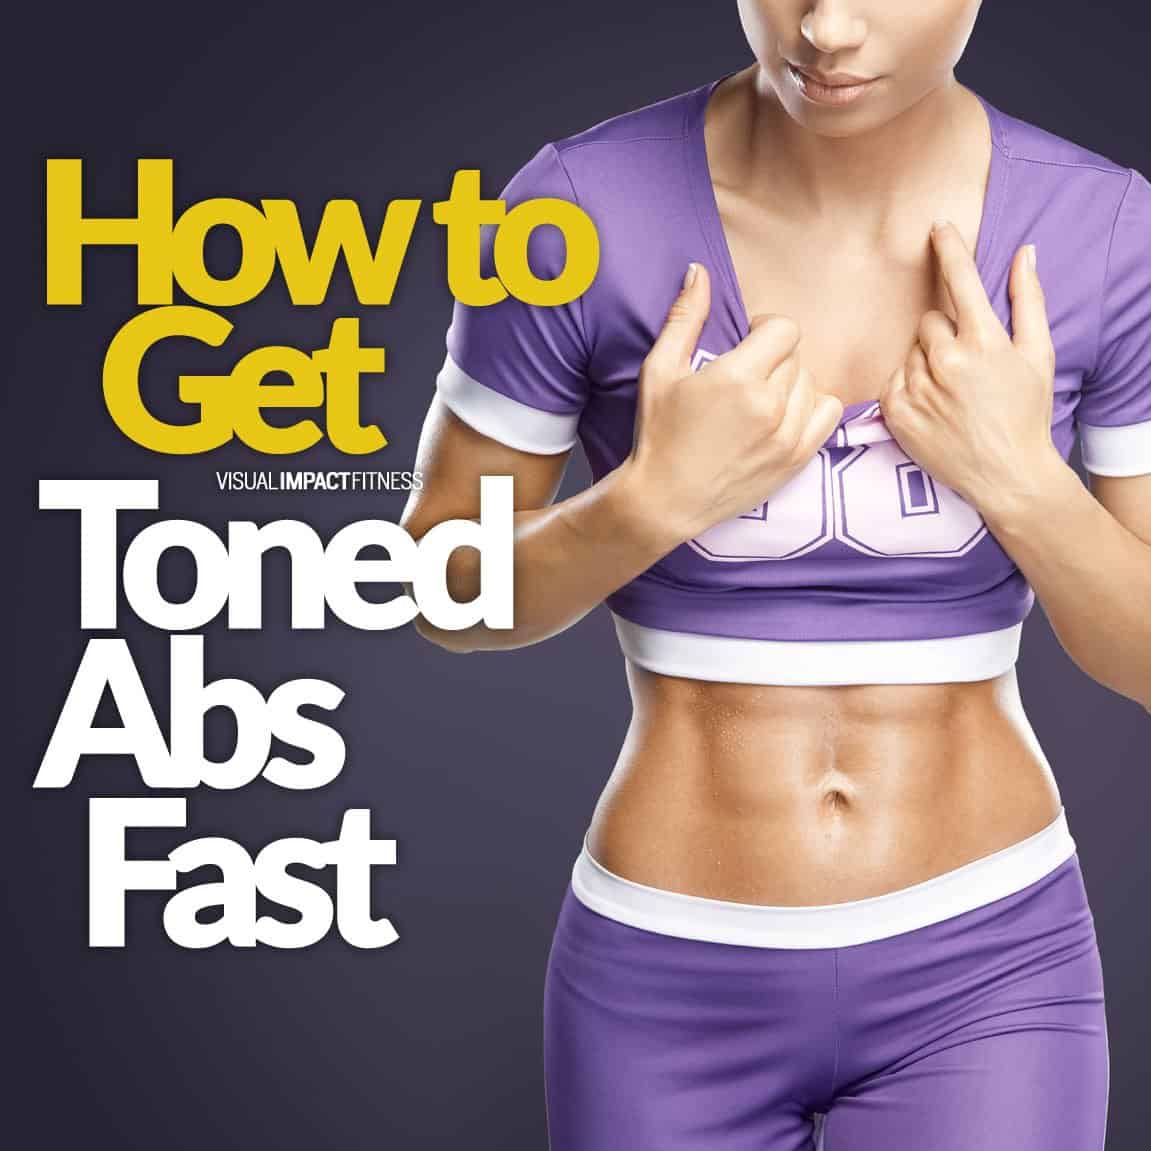 How to Get Toned Abs Fast